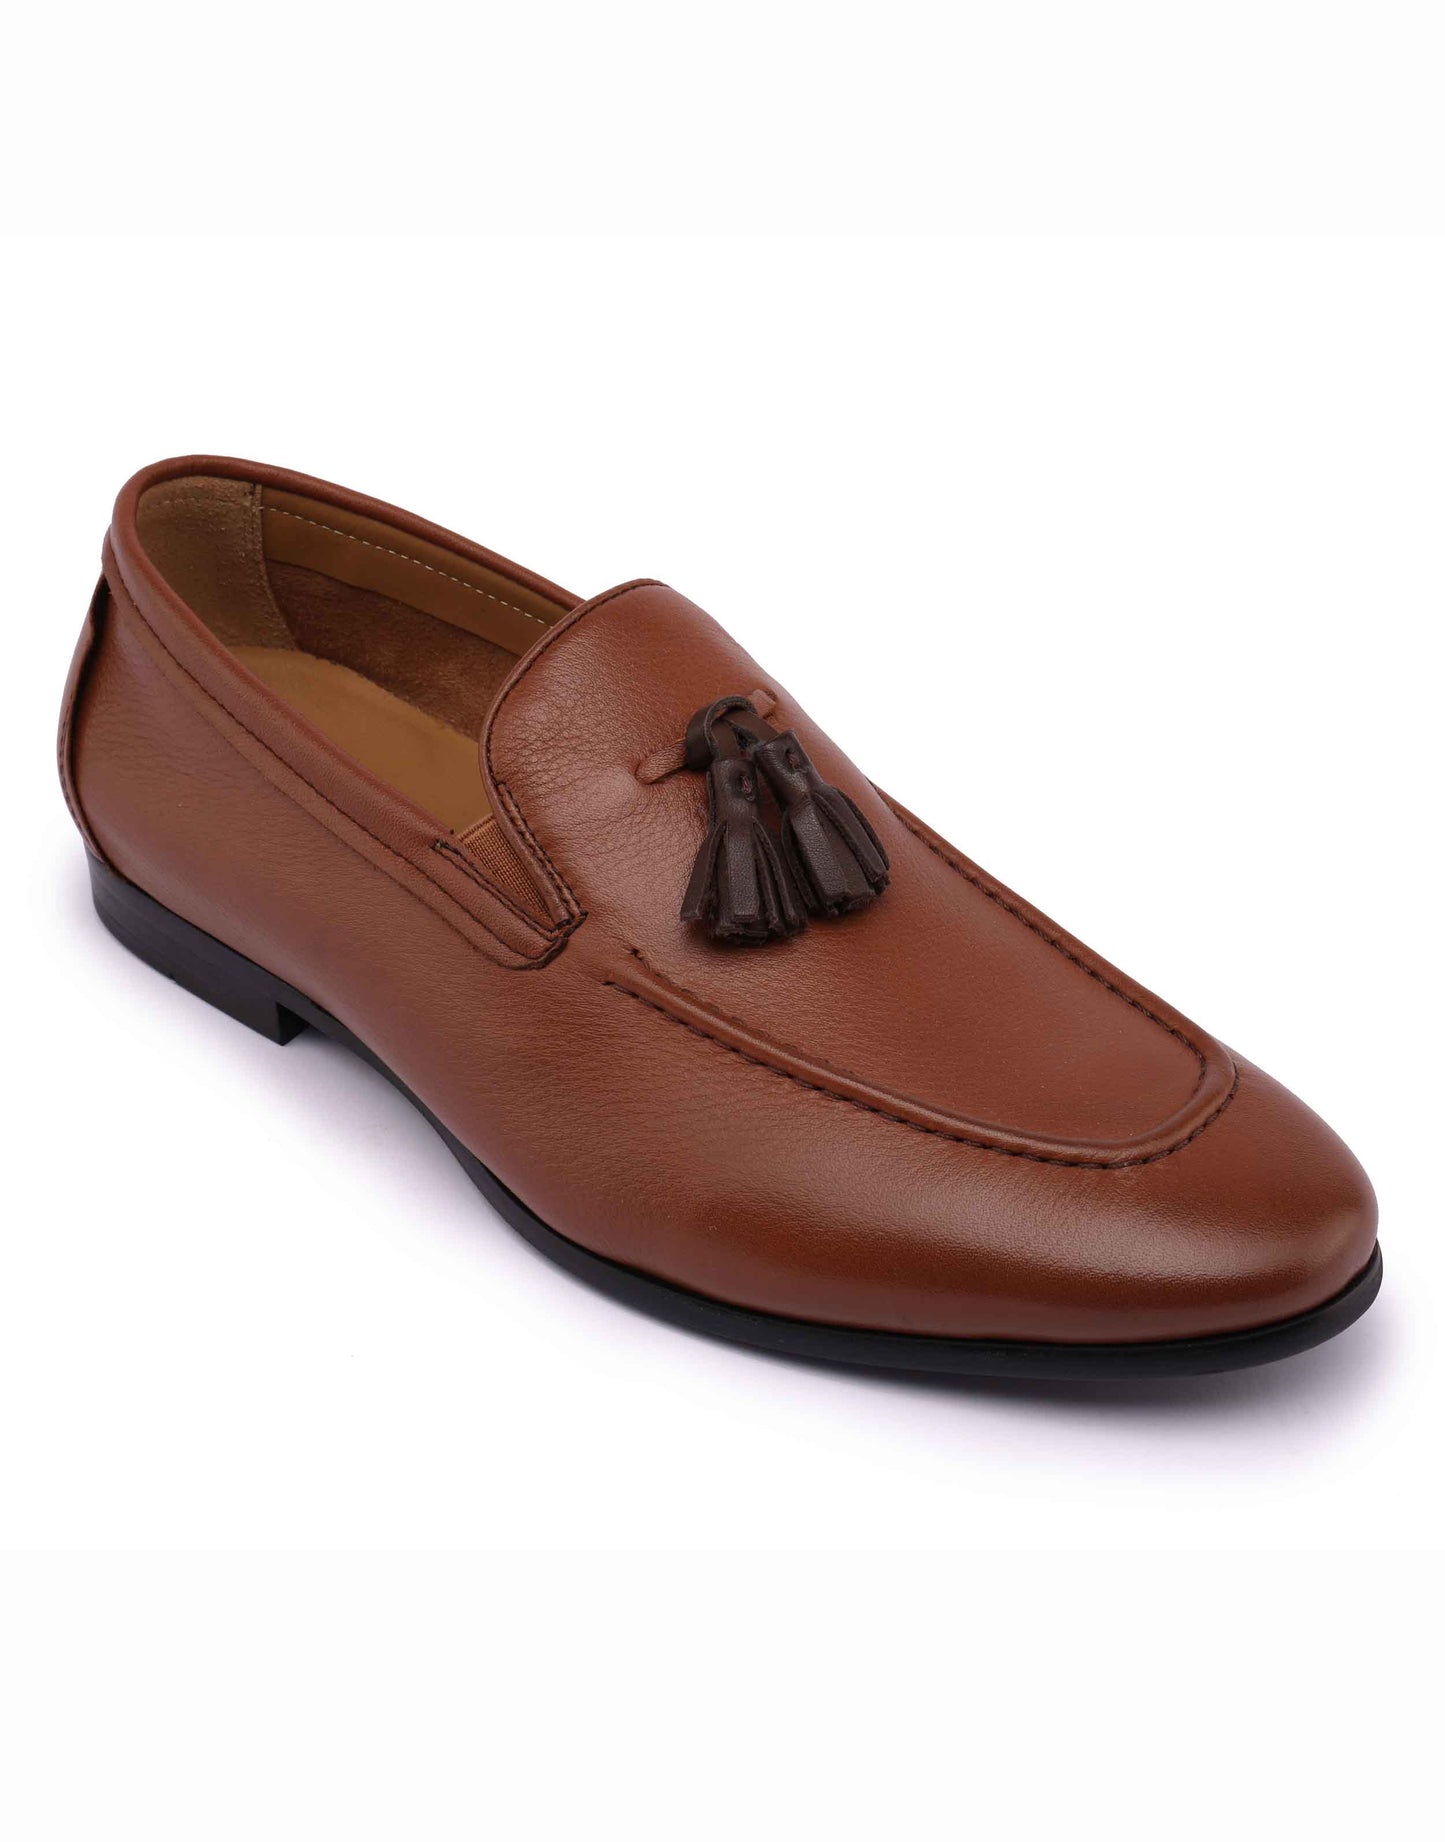 Tan Loafer With Brown Tassel